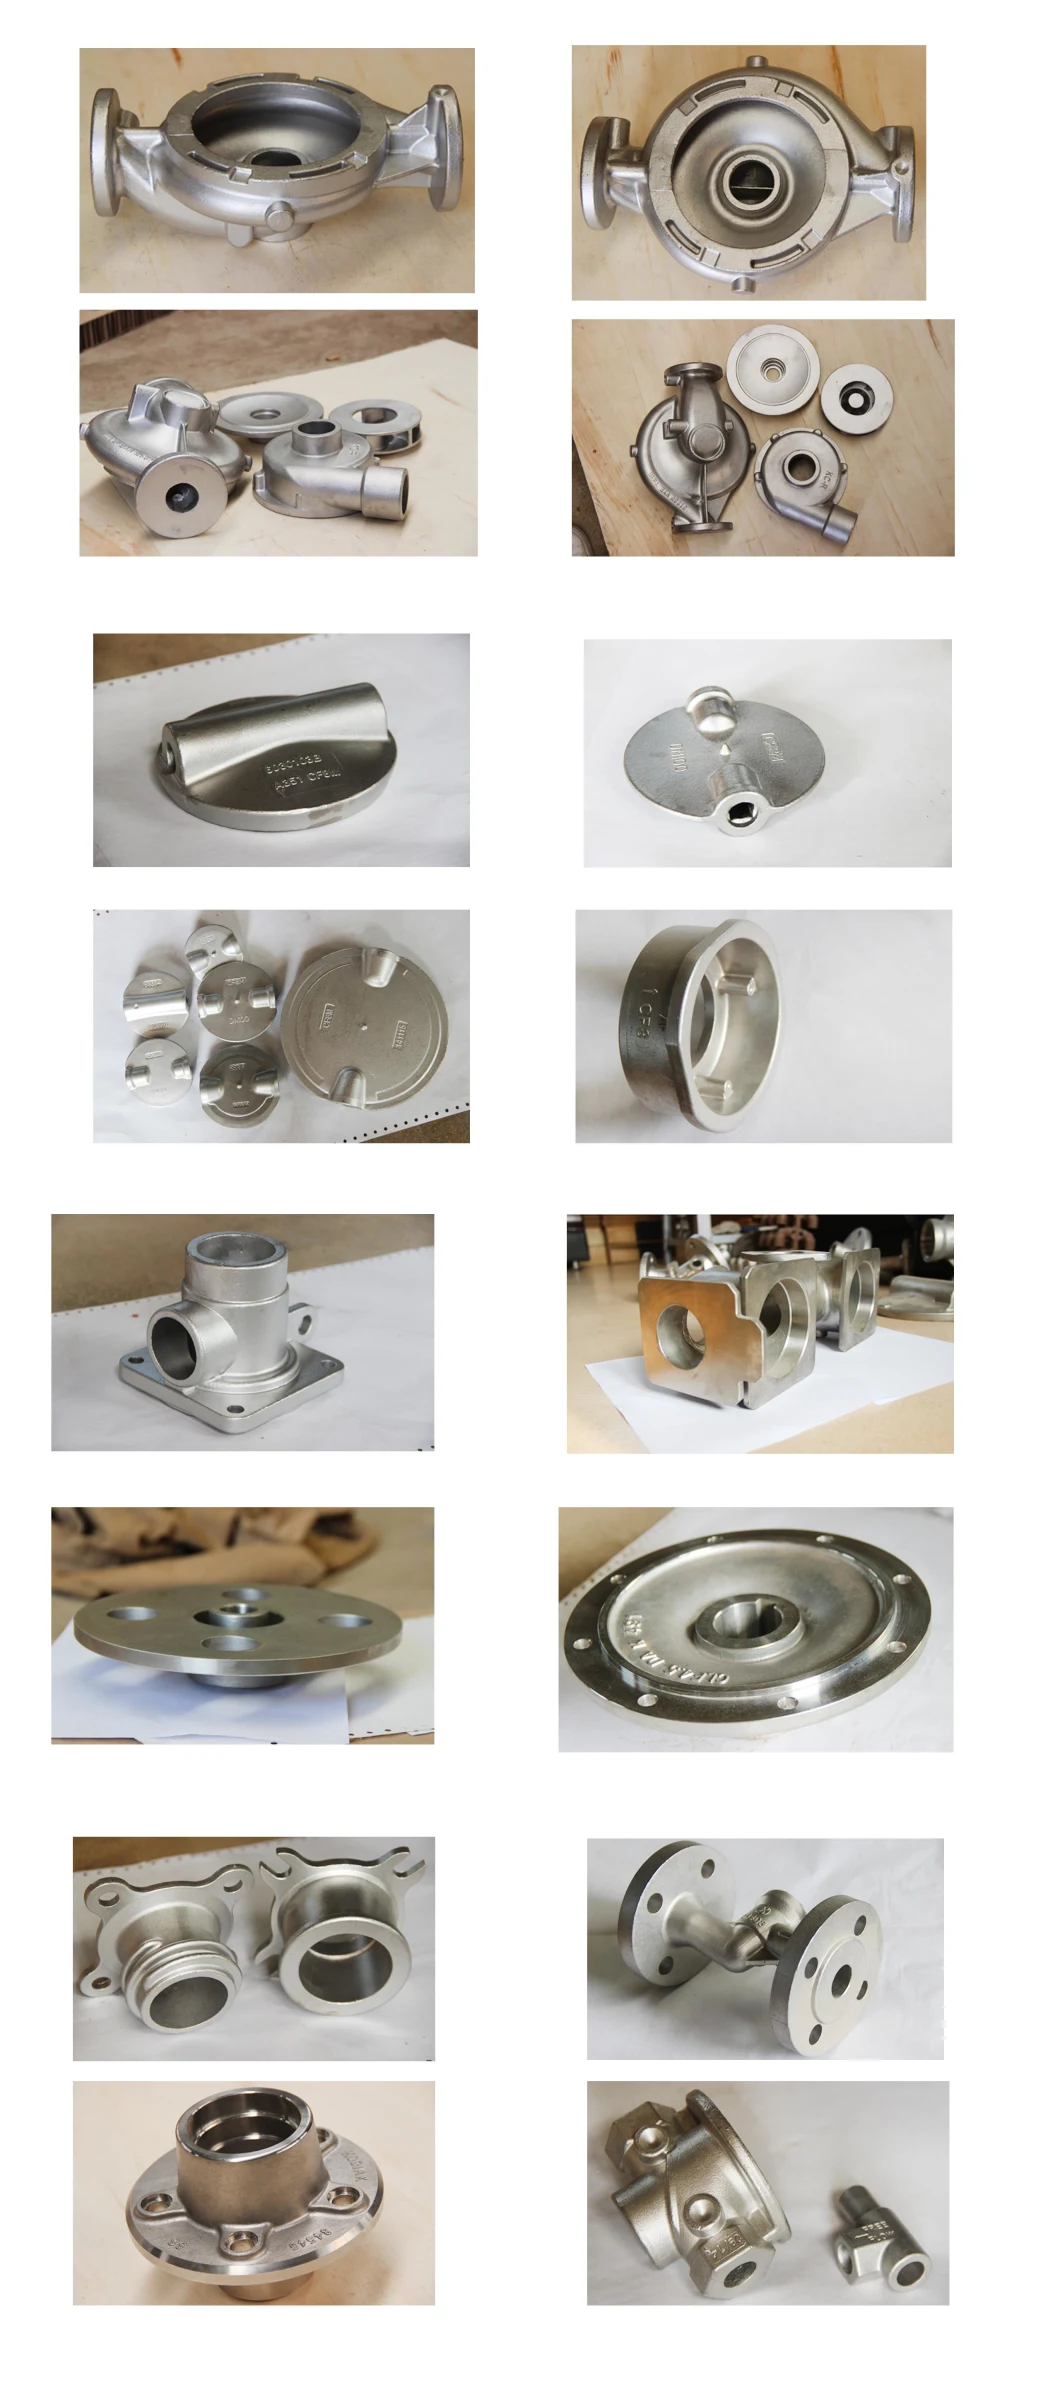 OEM Stainless Steel Investment Casting Engineering &amp; Construction Machinery Hardware Stainless Steel Spare Parts